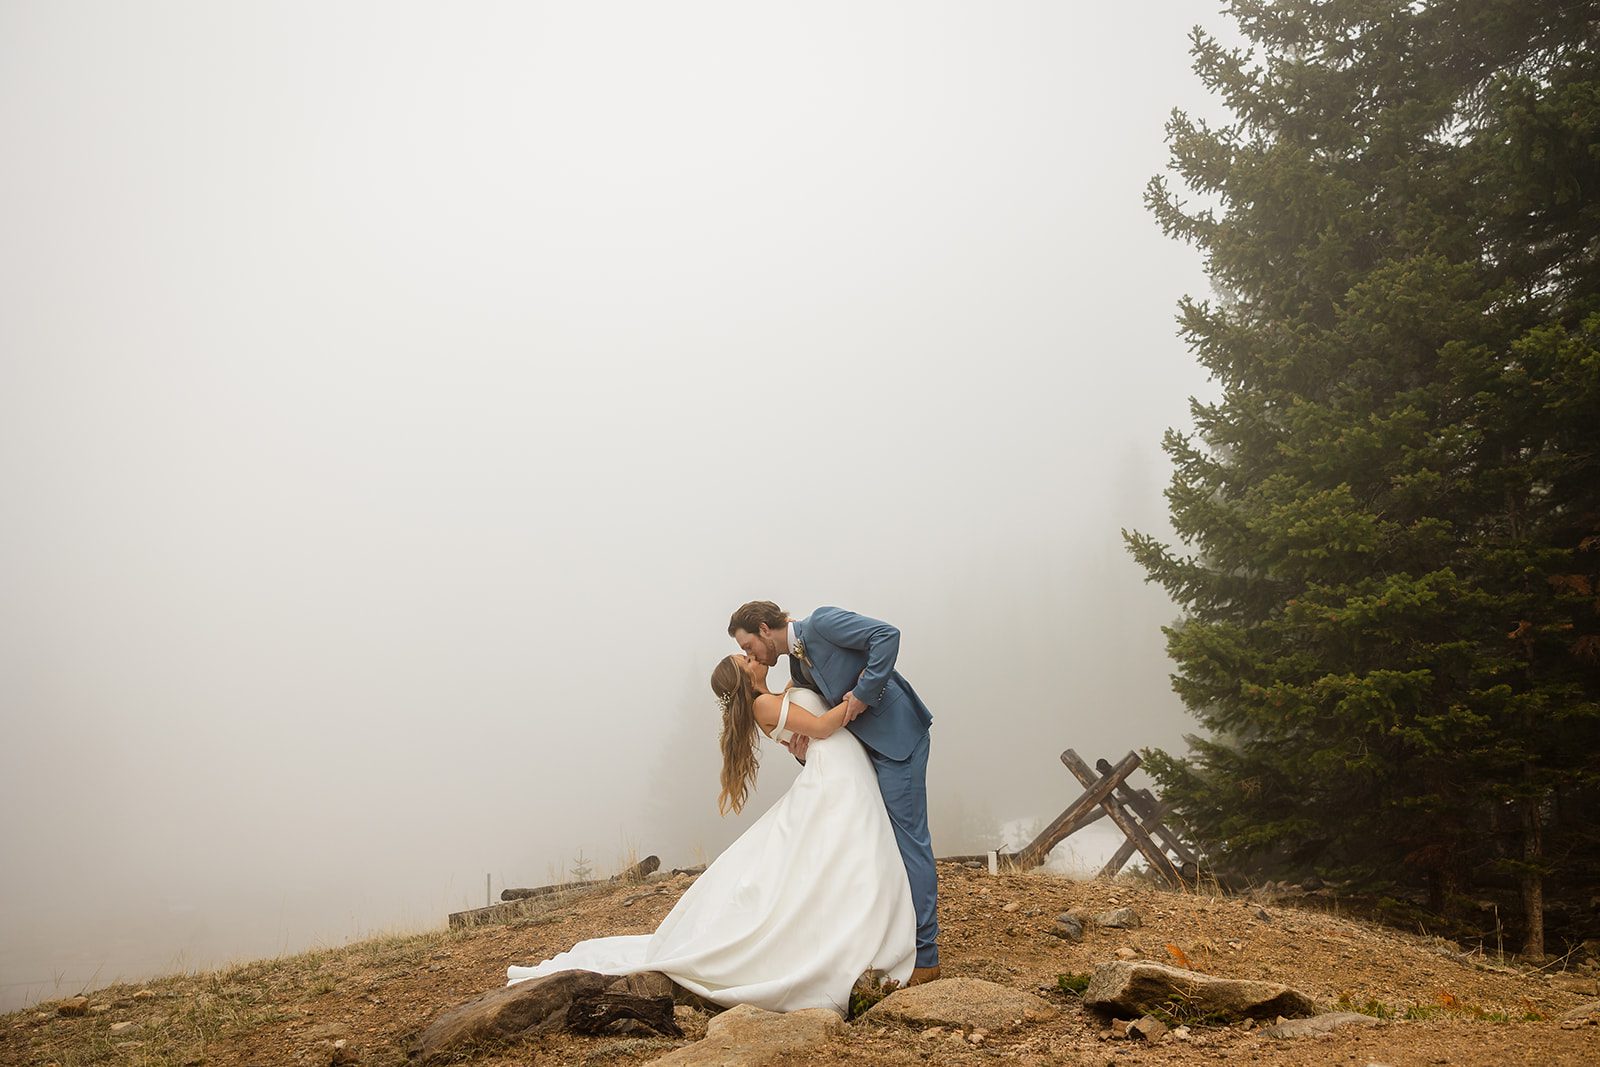 Bride and groom first kiss at Estes Park Colorado Hidden Valley Elopement in Rocky Mountain National Park